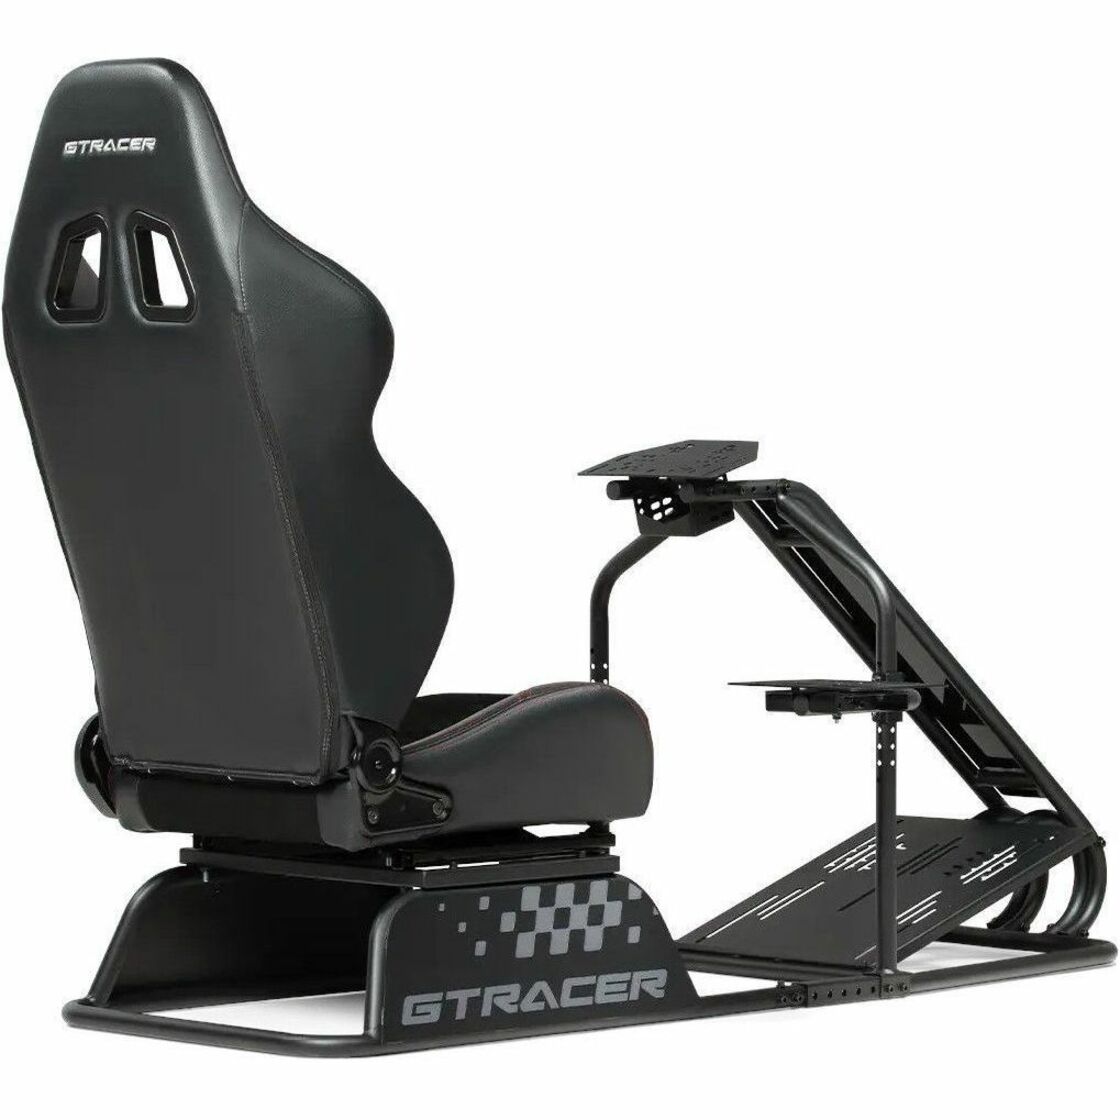 GTRacer Racing Cockpit Next Level Gaming (NLR-R001)